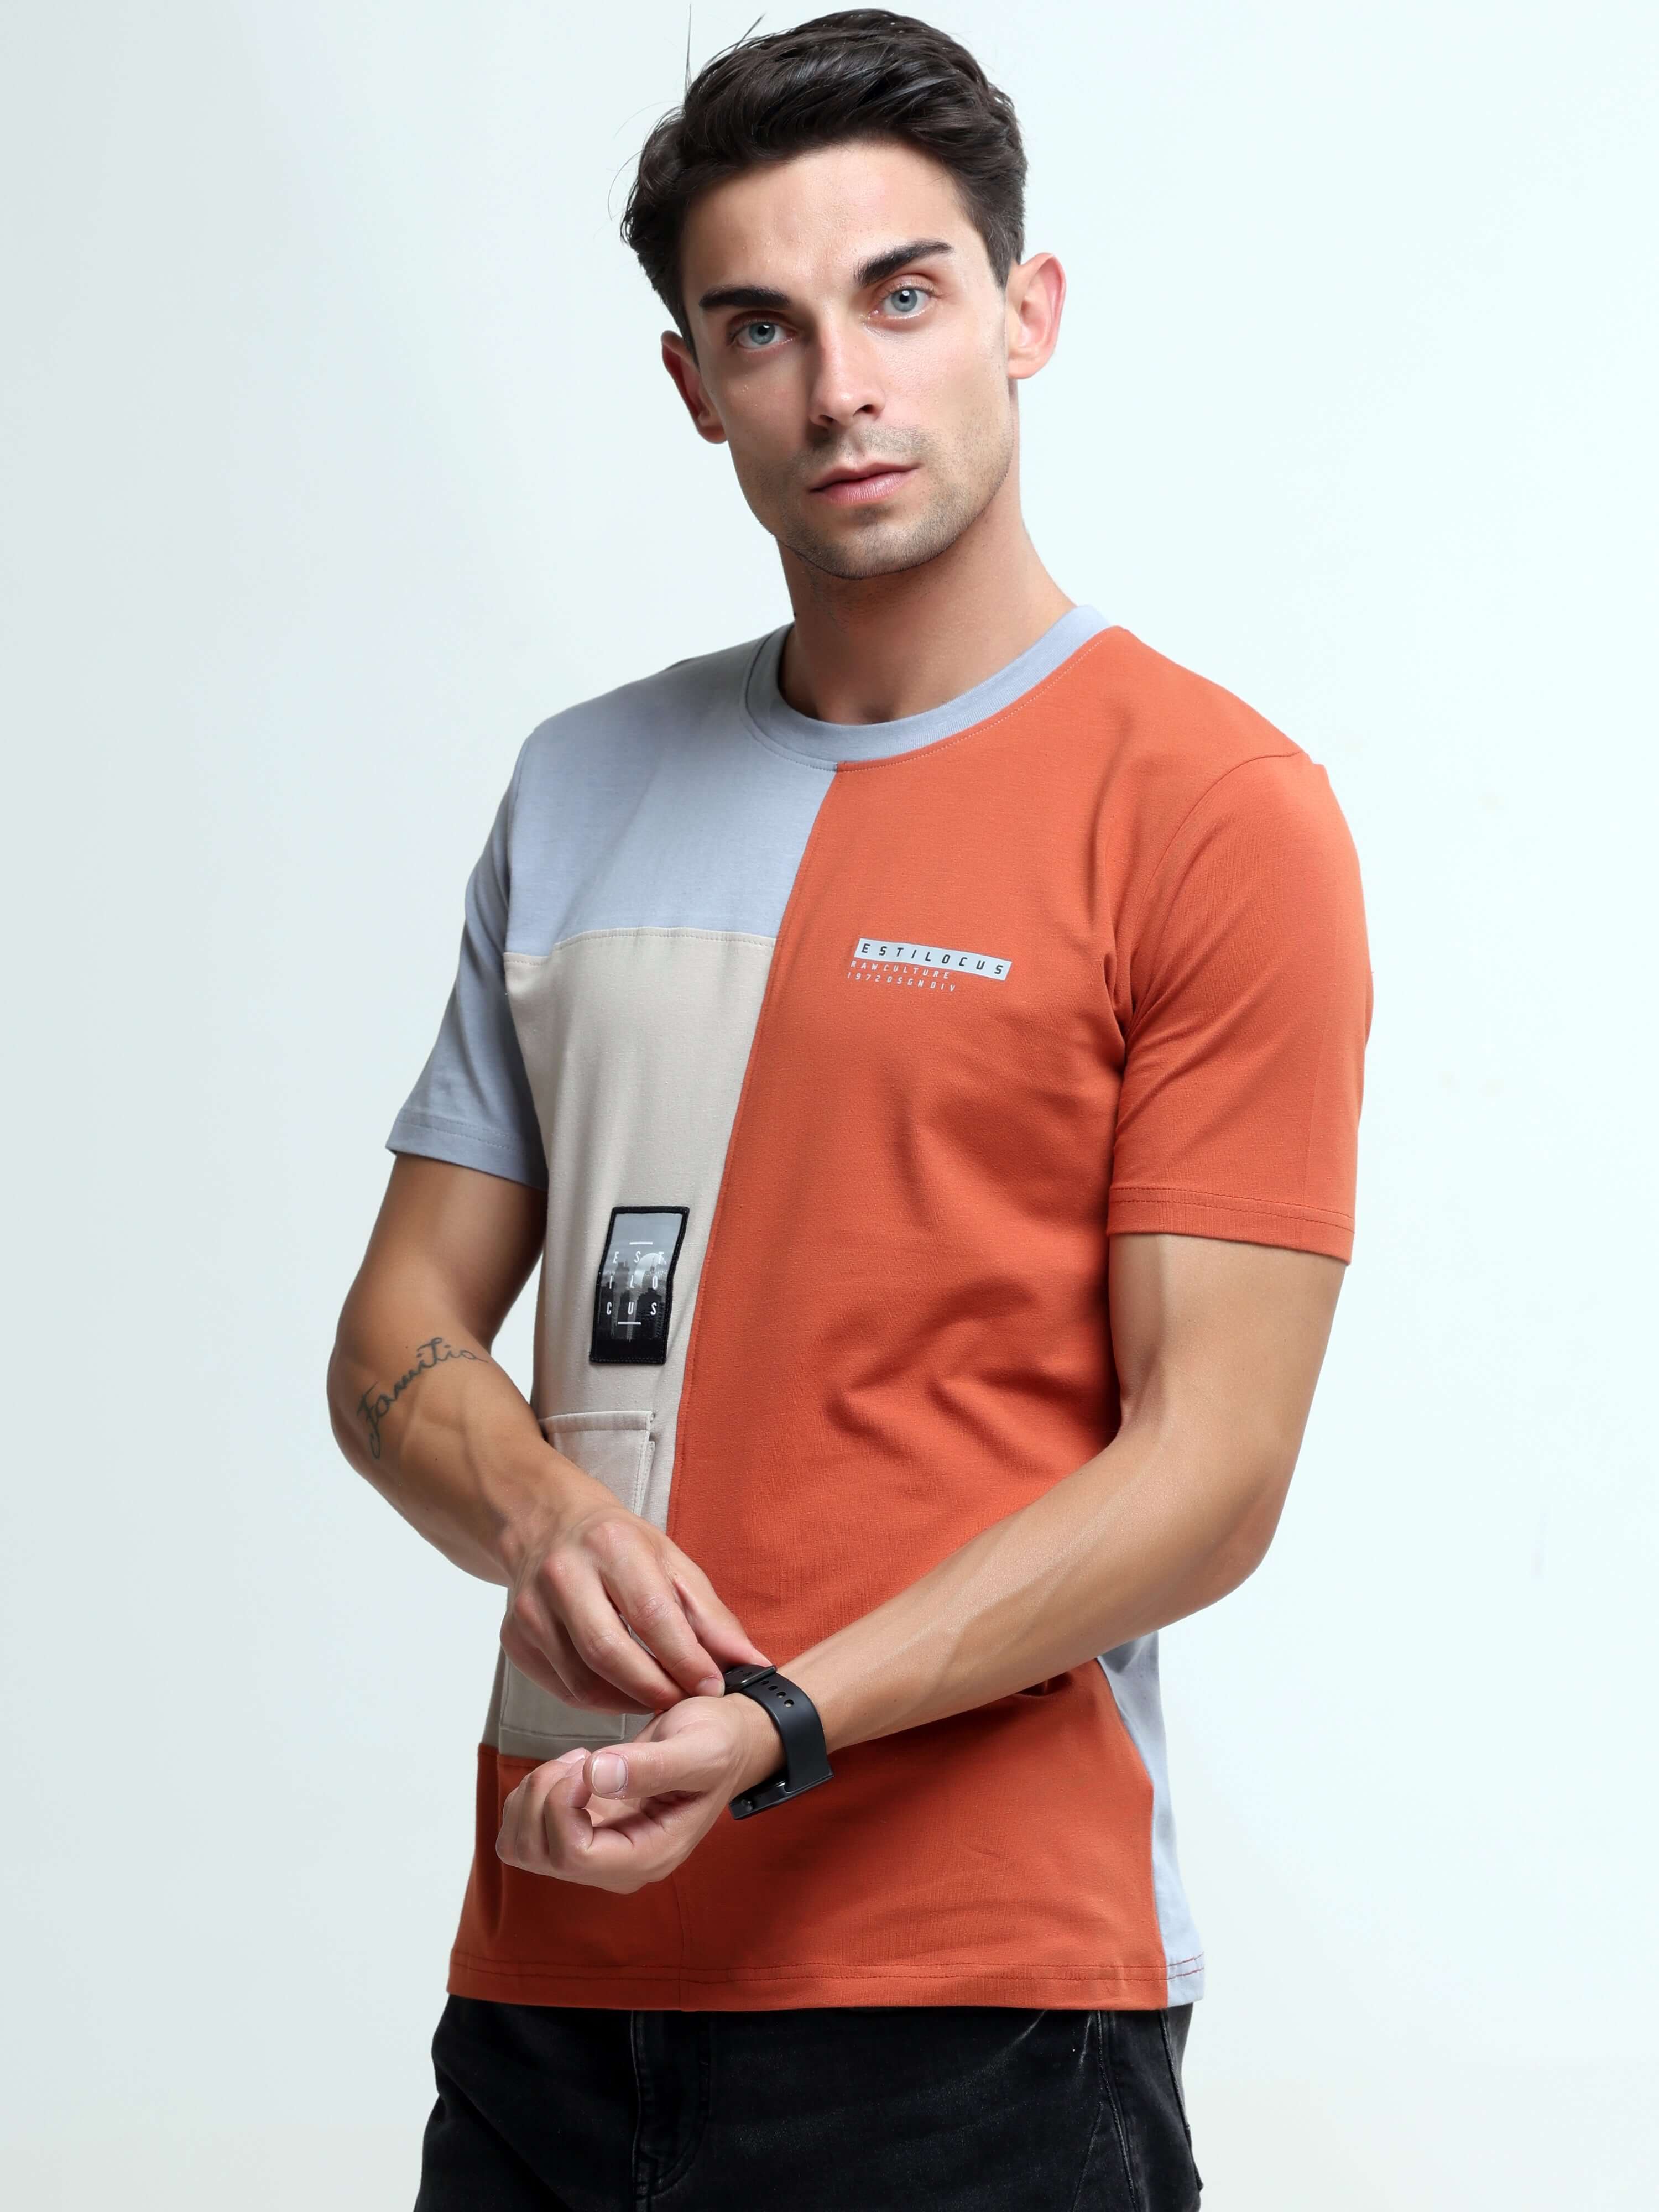 Vigor tangy orange light weight tshirt shop online at Estilocus. This relax-fit Cut and Sew T-shirt is comfortable and the perfect essential all year round. Pair it with white jeans and sneakers and layer it up with a denim jacket for a casual and put-tog